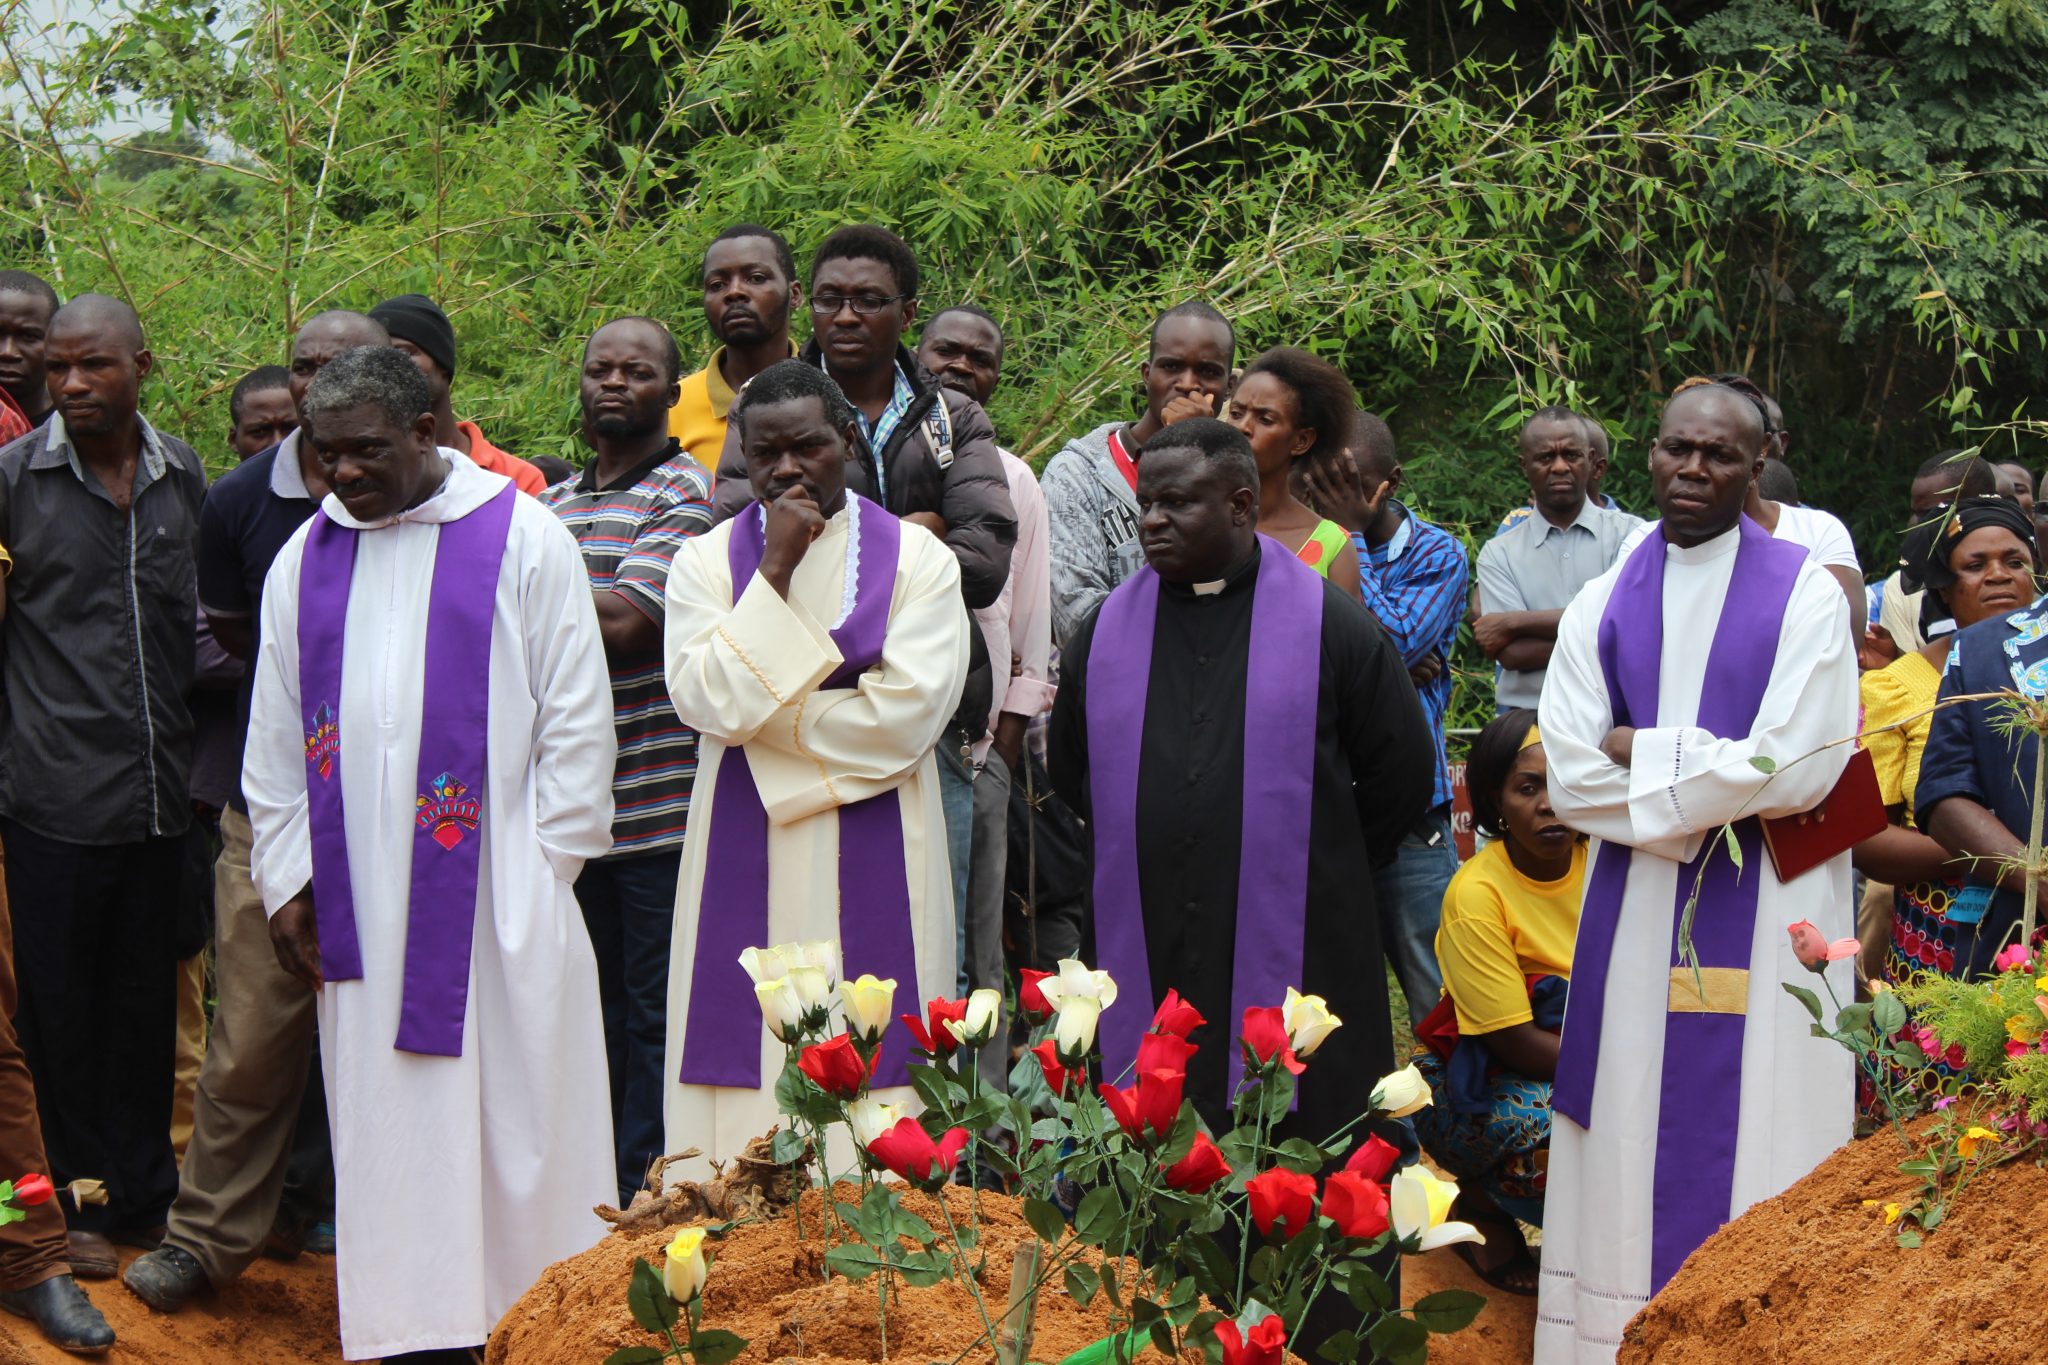 Procurator General, Rev. Fr. Charles Tembo lost his young Brother Emmanuel Tembo